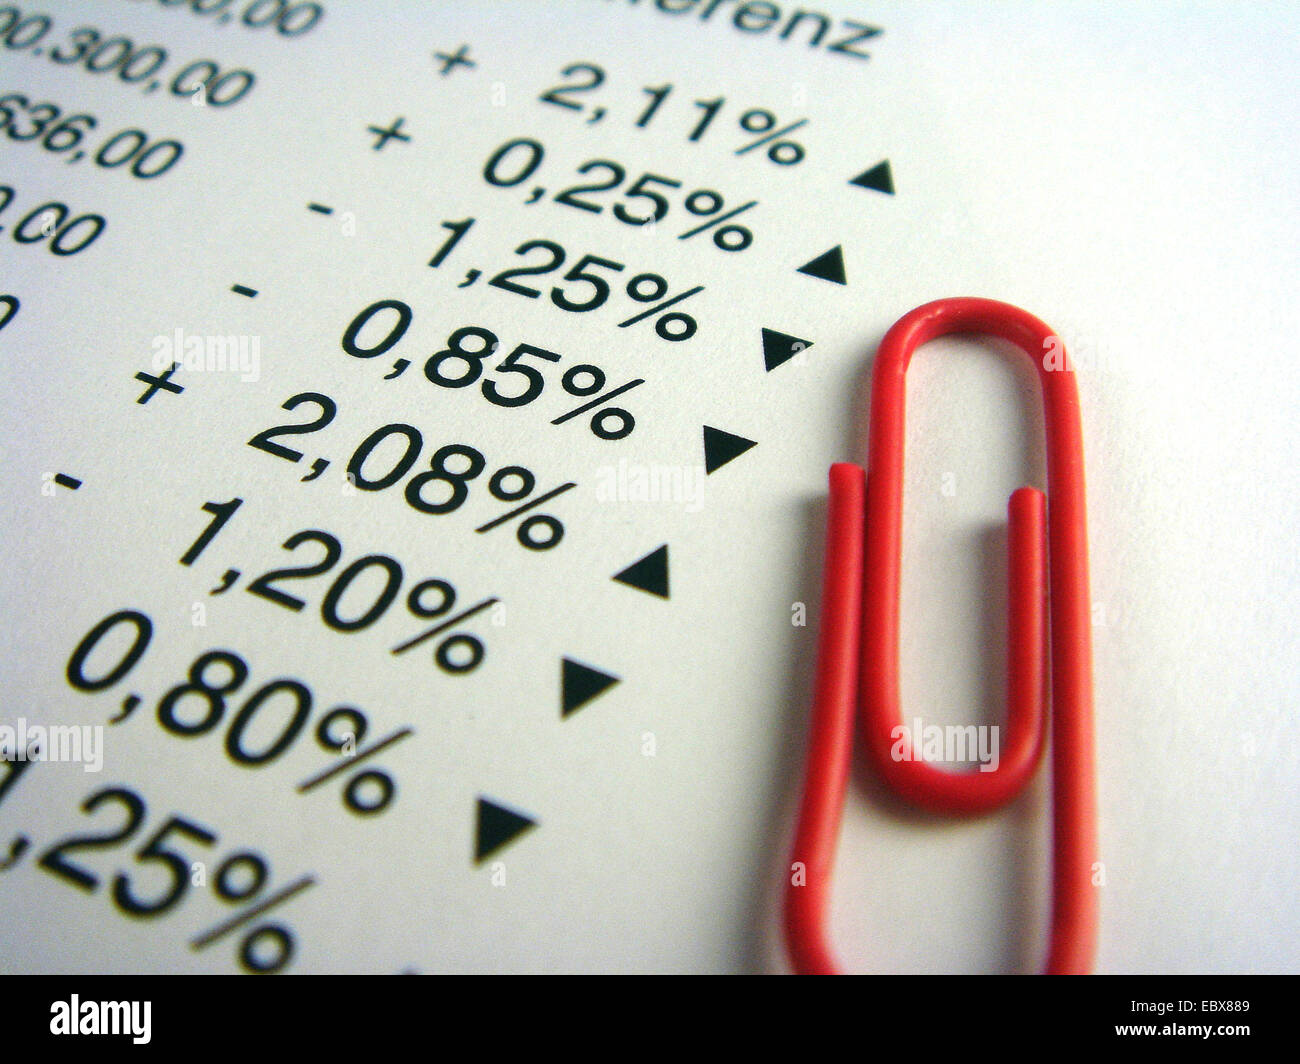 market values and red paper clip Stock Photo